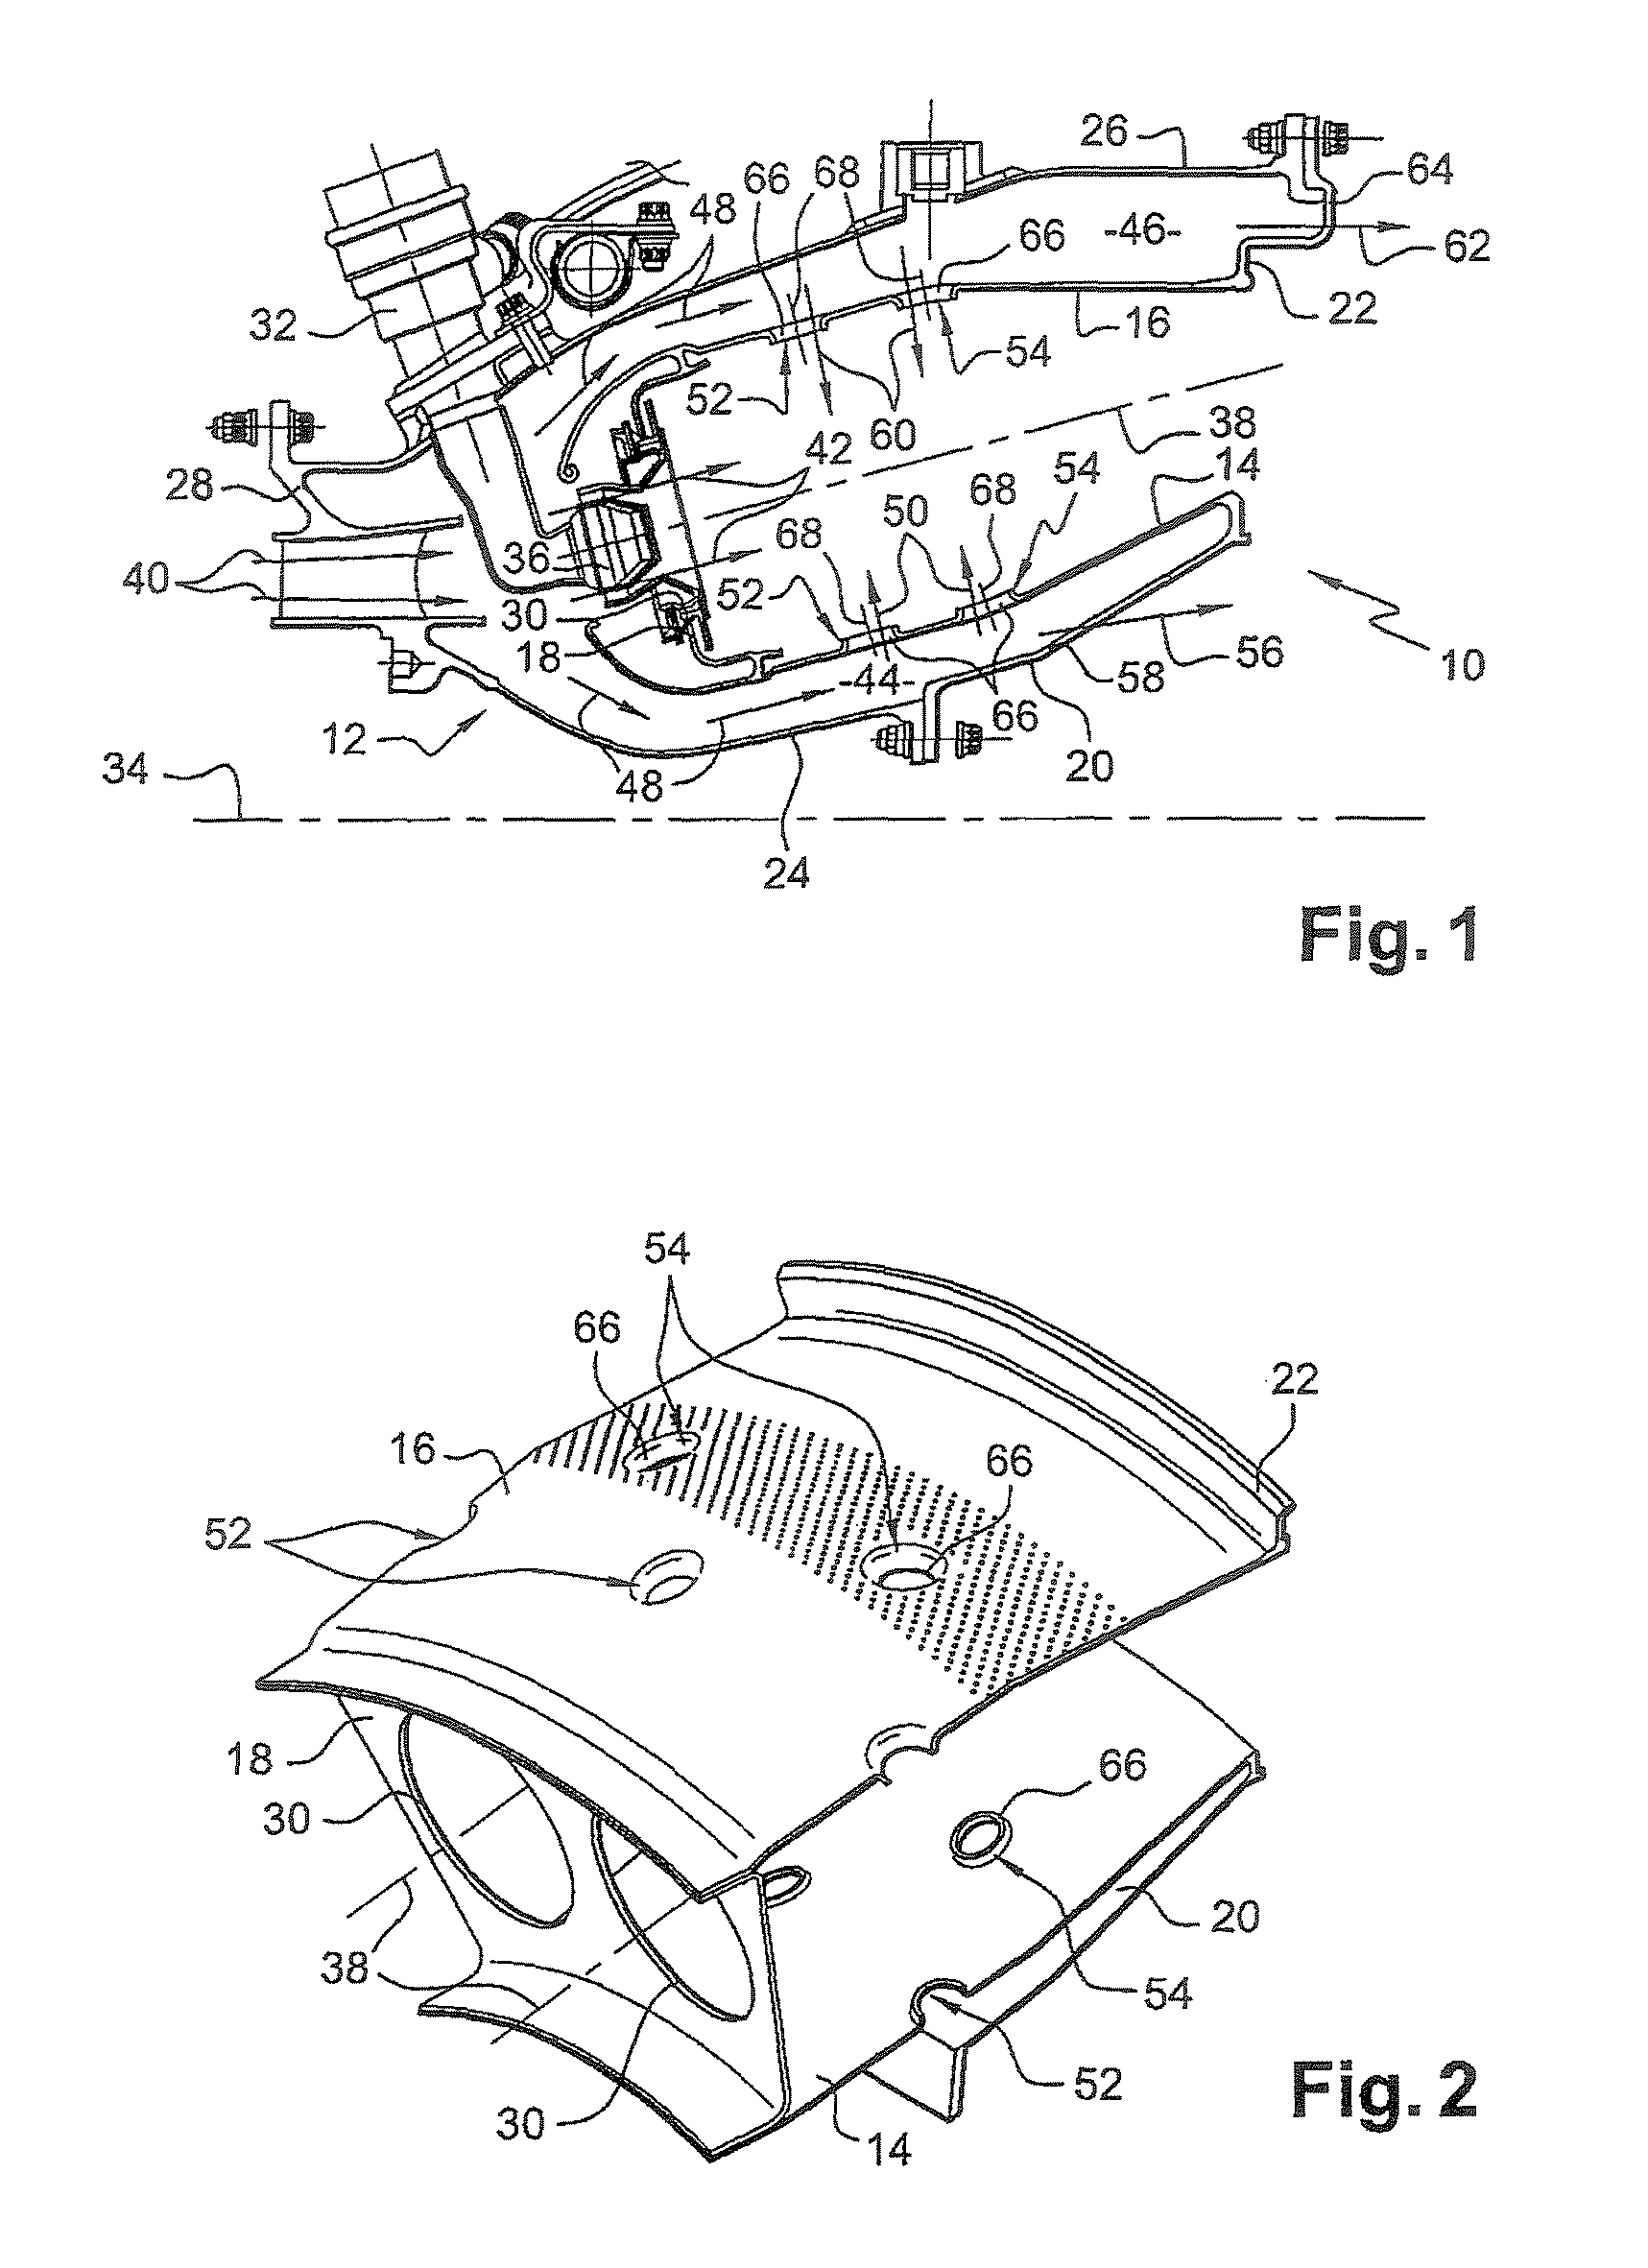 Combustion chamber in a turbomachine